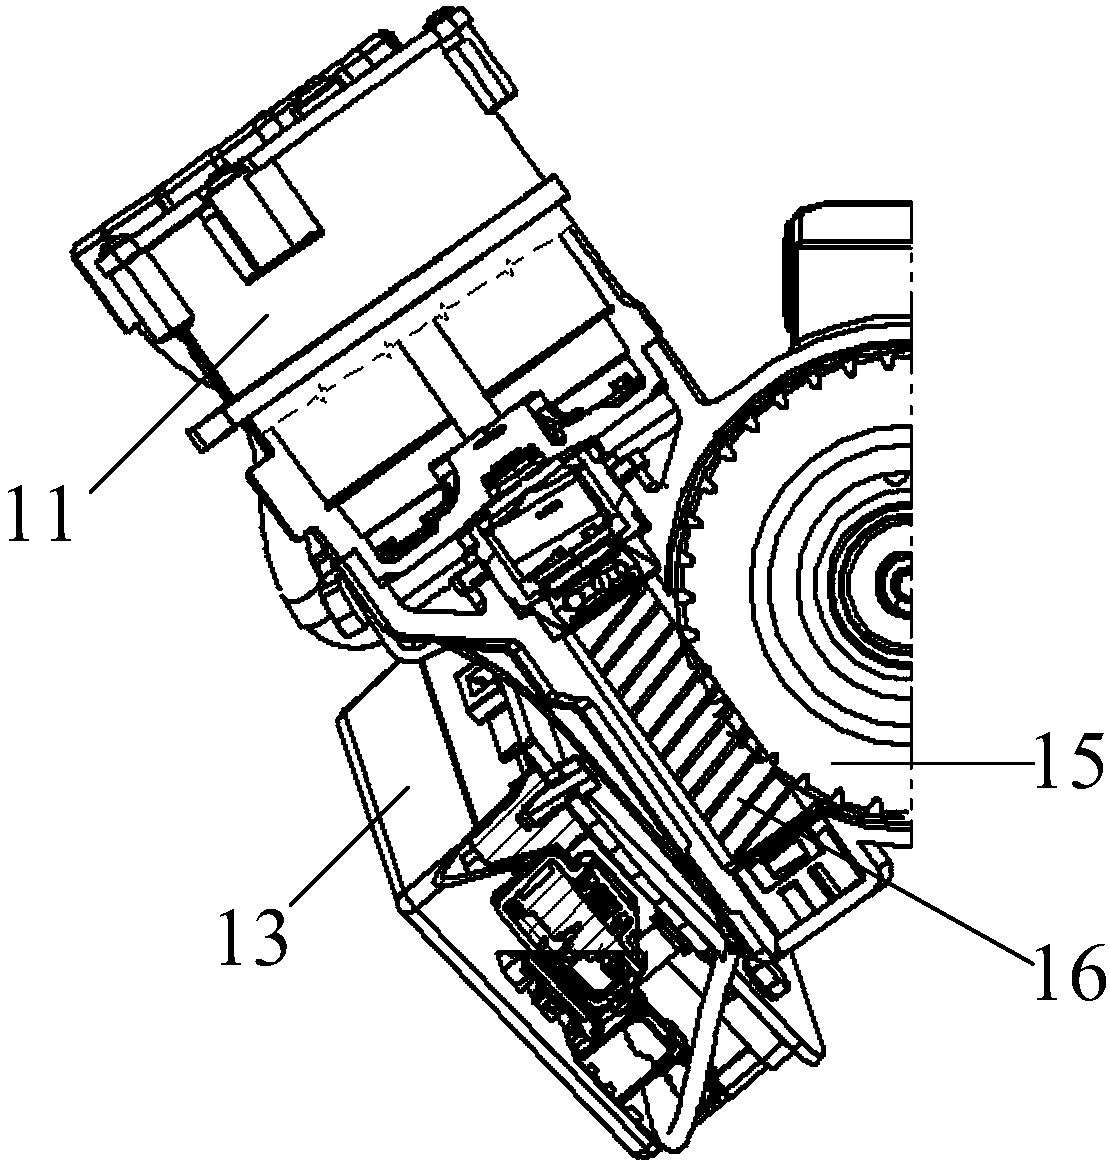 Compound power-assisted steering mechanism